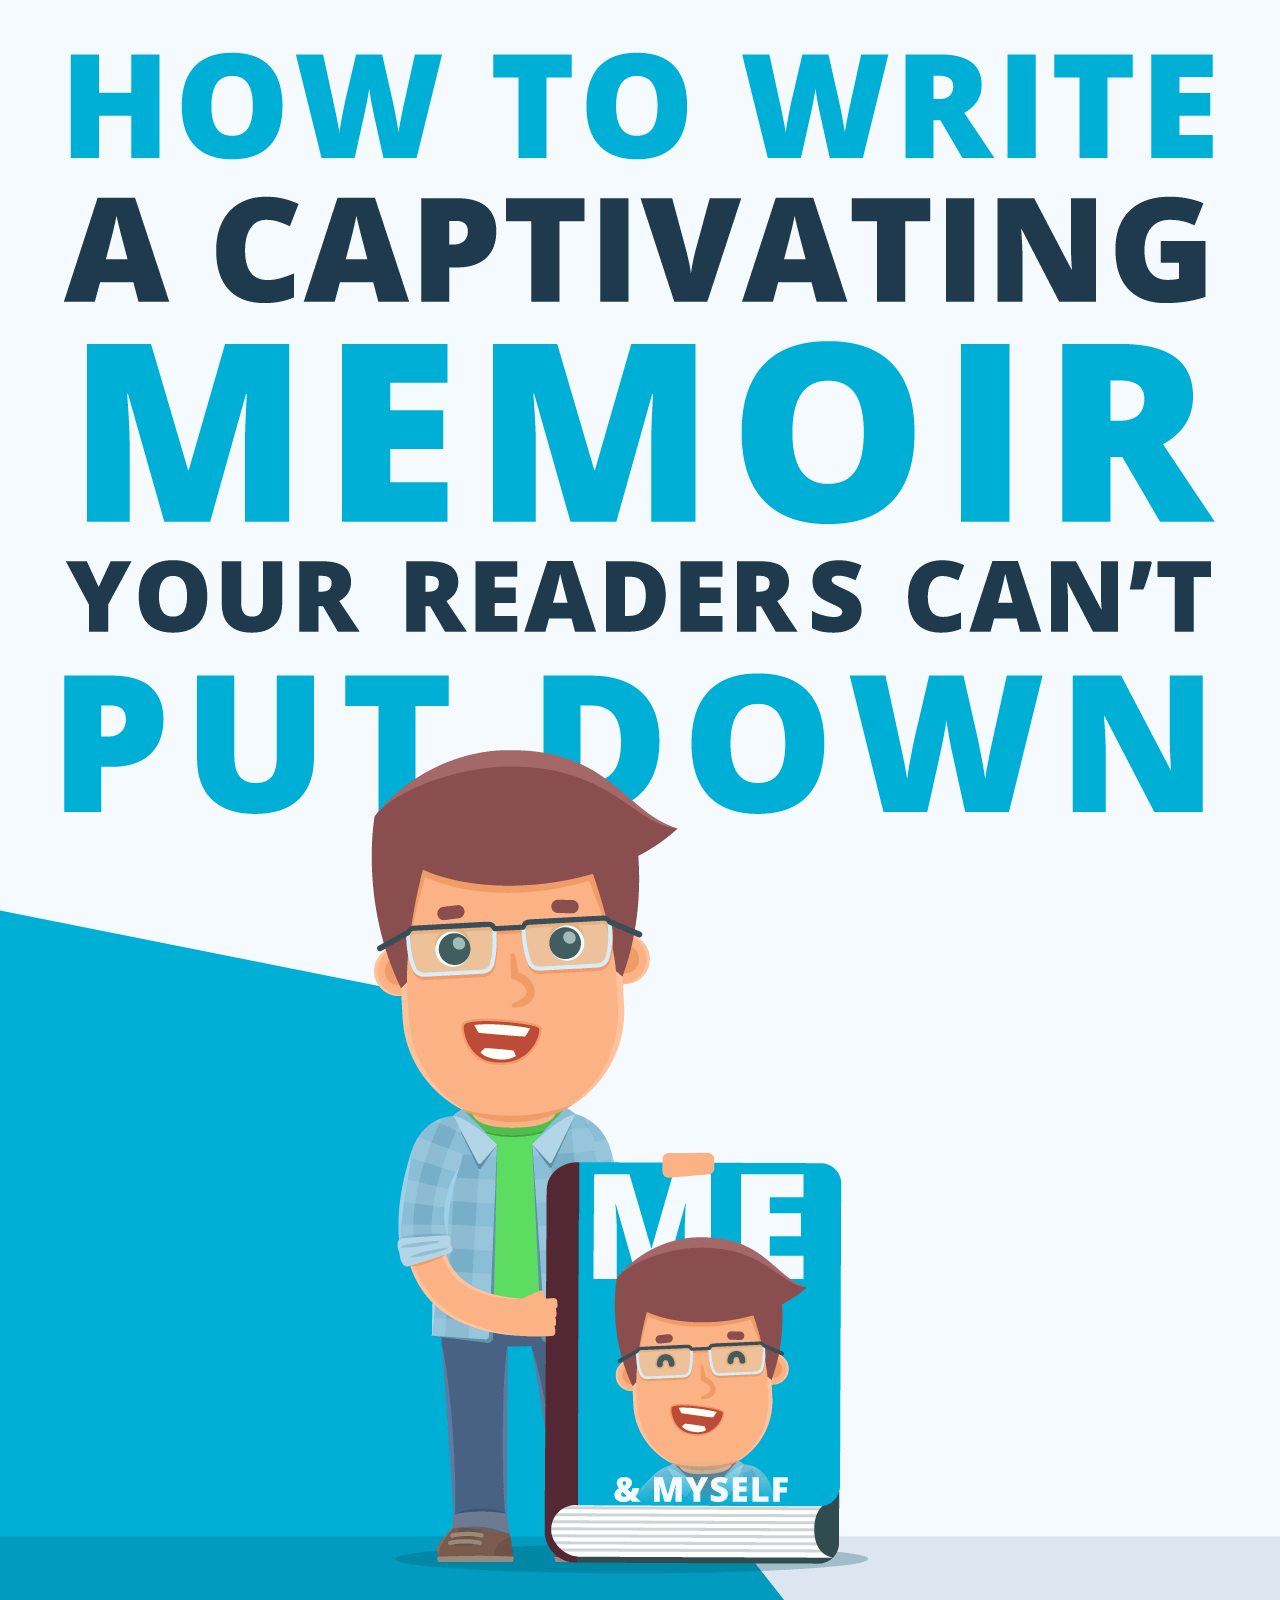 How To Write a Memoir Your Readers Can't Put Down